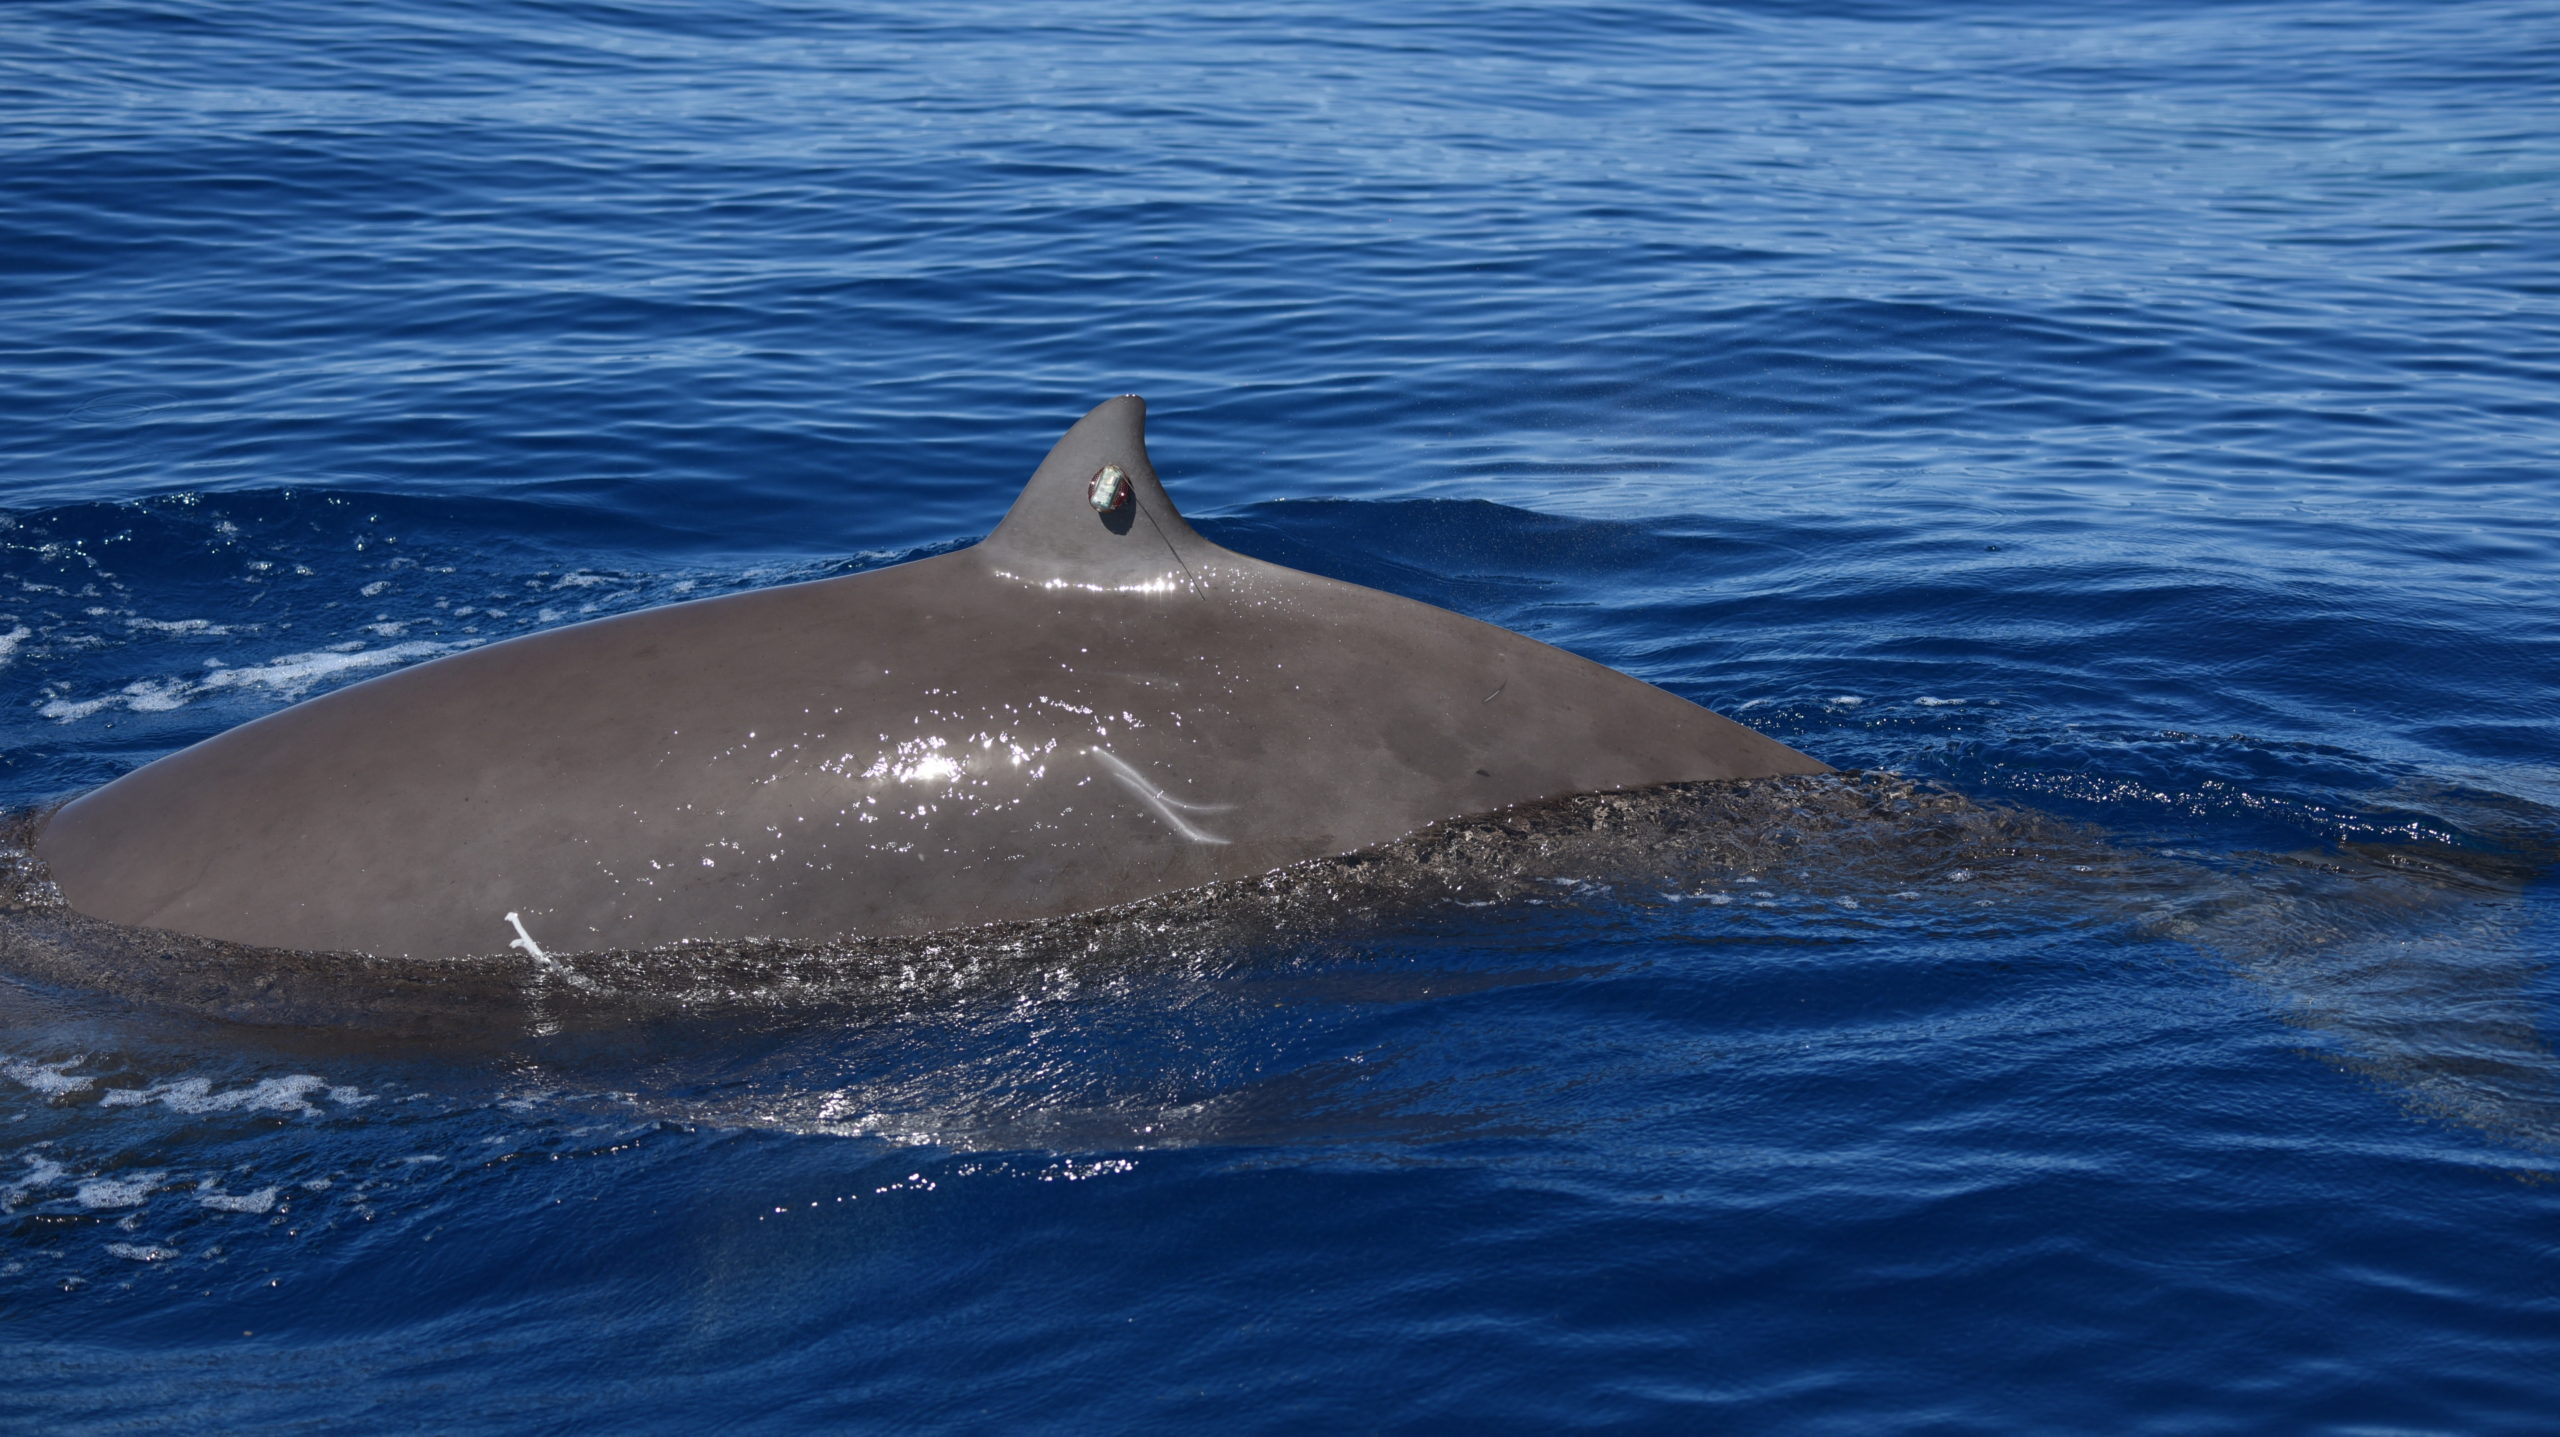 A Cuvier's beaked whale with a tag on its dorsal fin. (Image: Andrew Read/Duke University)